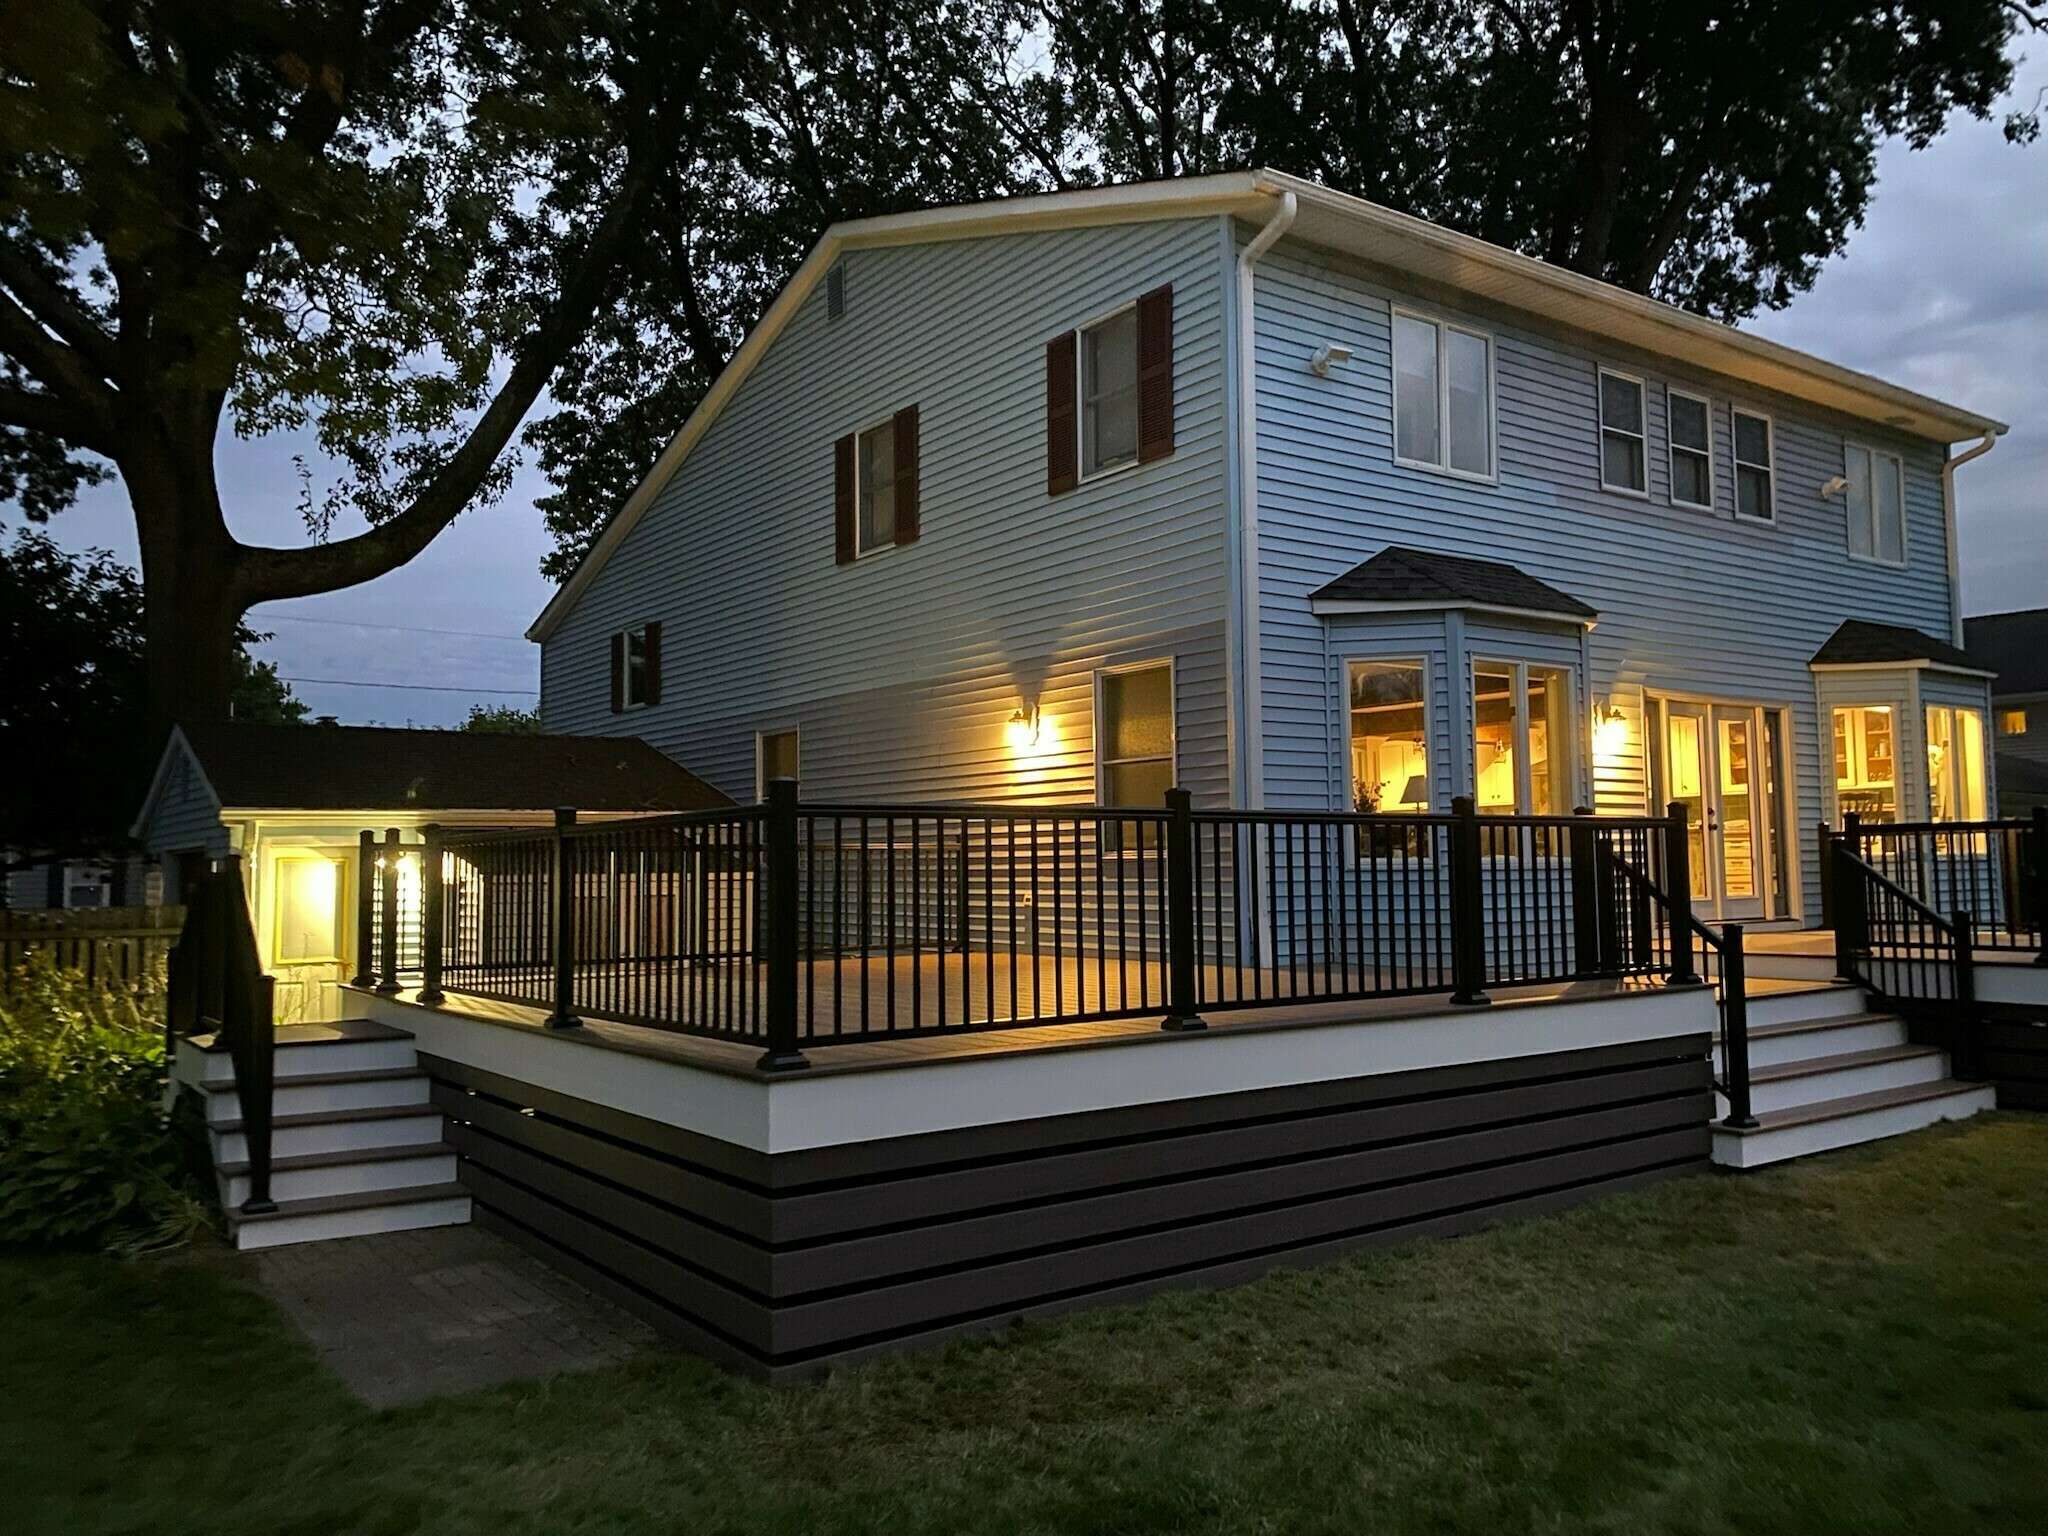 Aluminum Railing Solutions in Toms River, NJ: ByCarls Offers Durability and Style